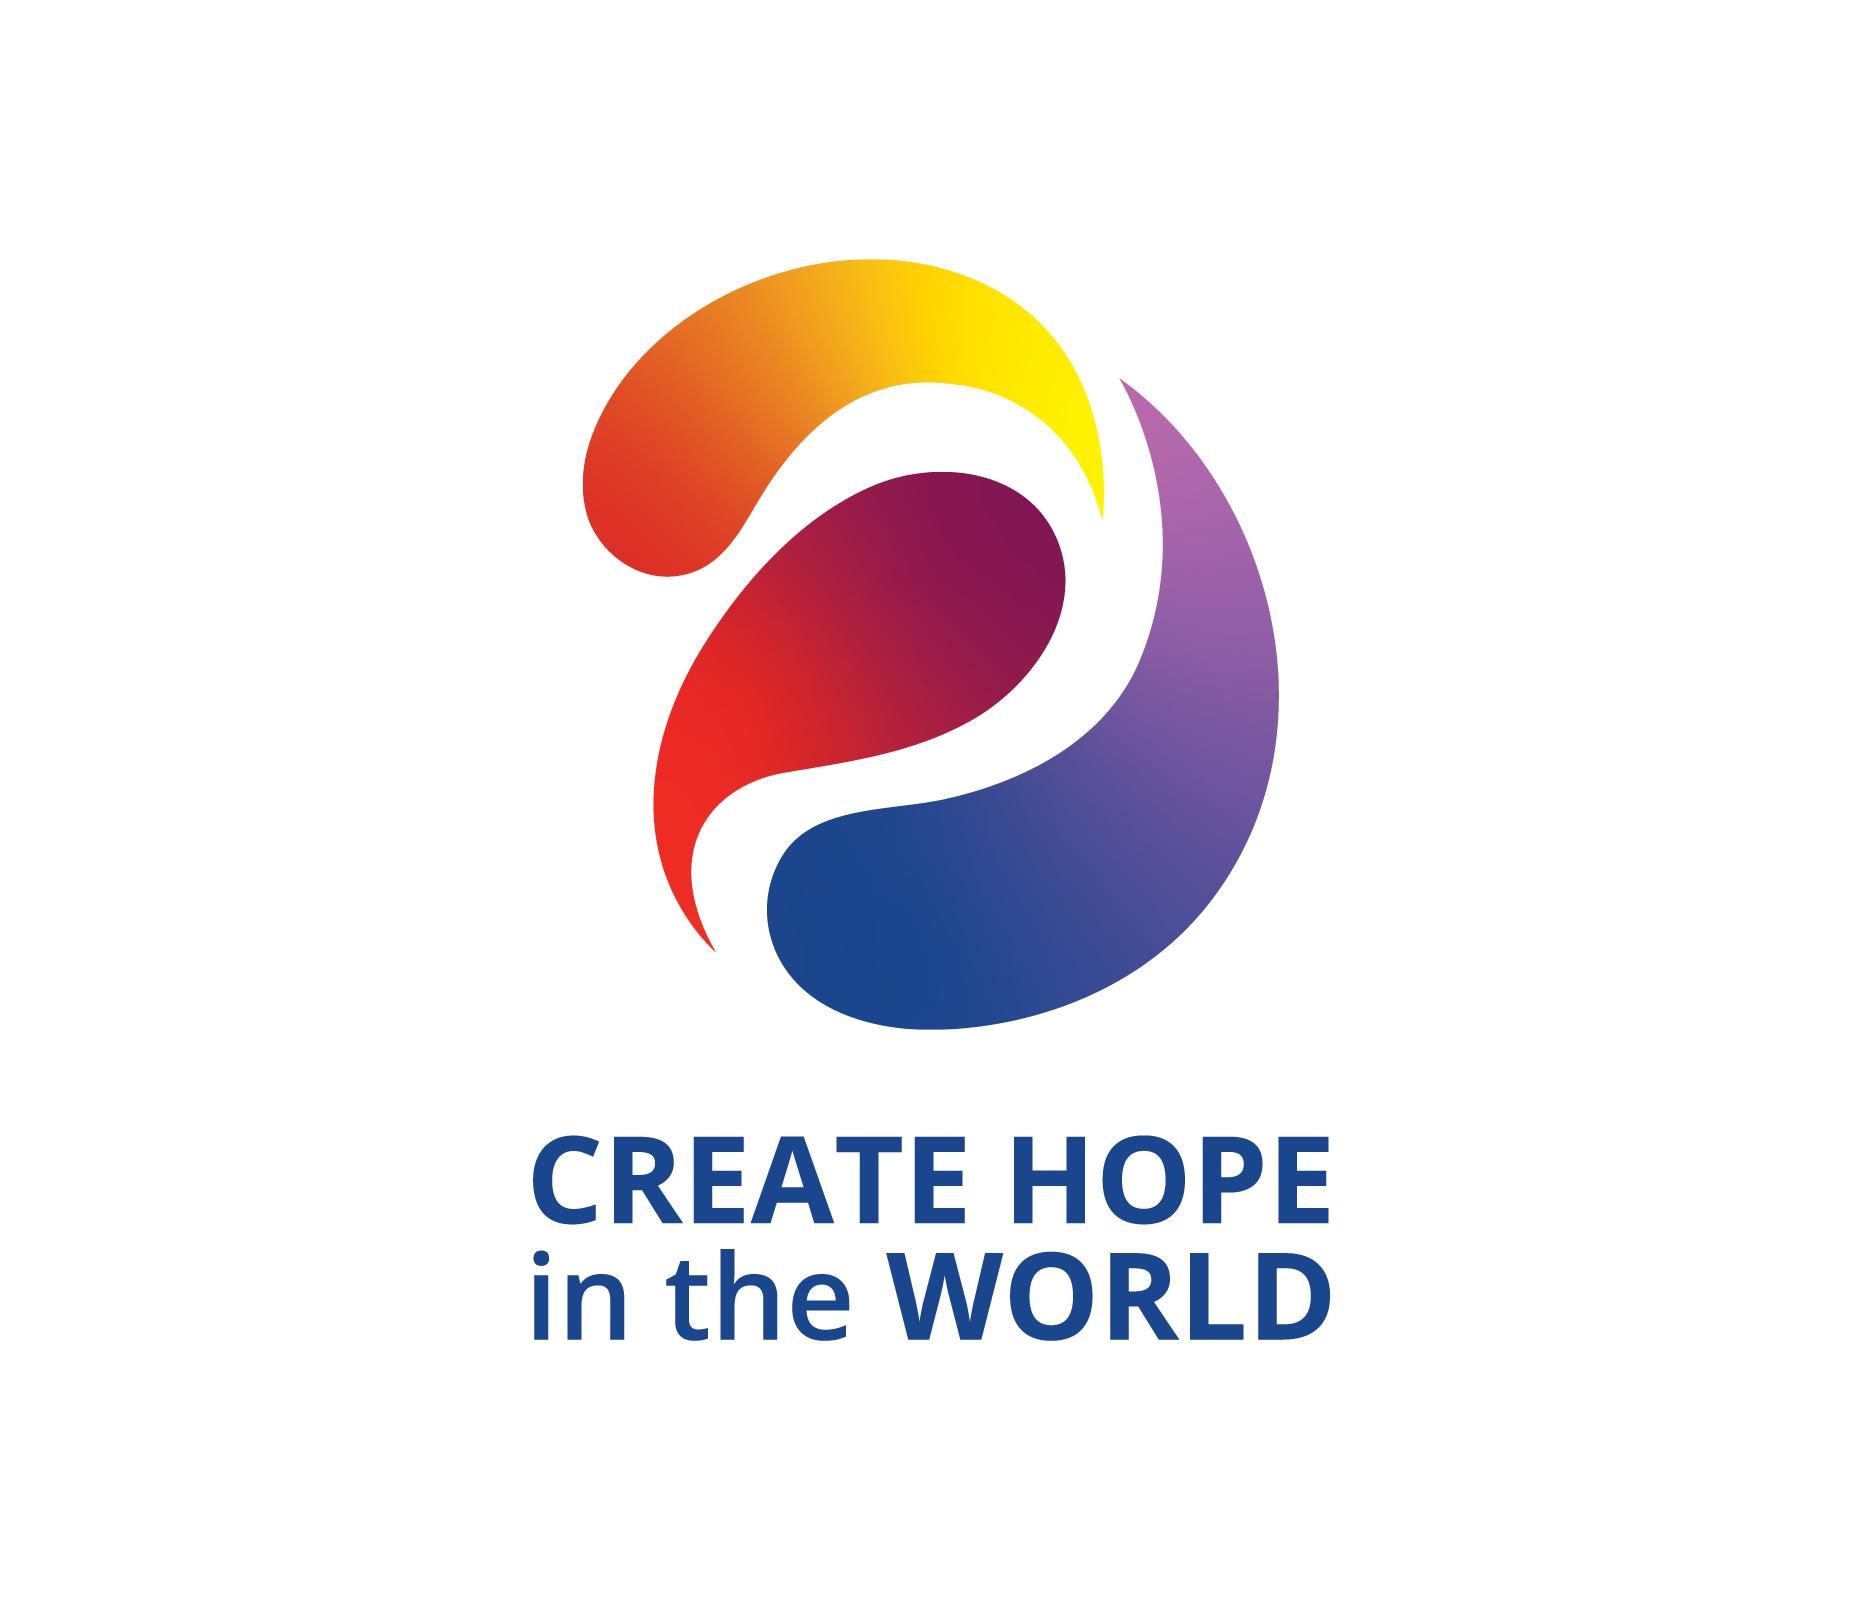 Logo of hand holding globe, with words Serve To Change Lives